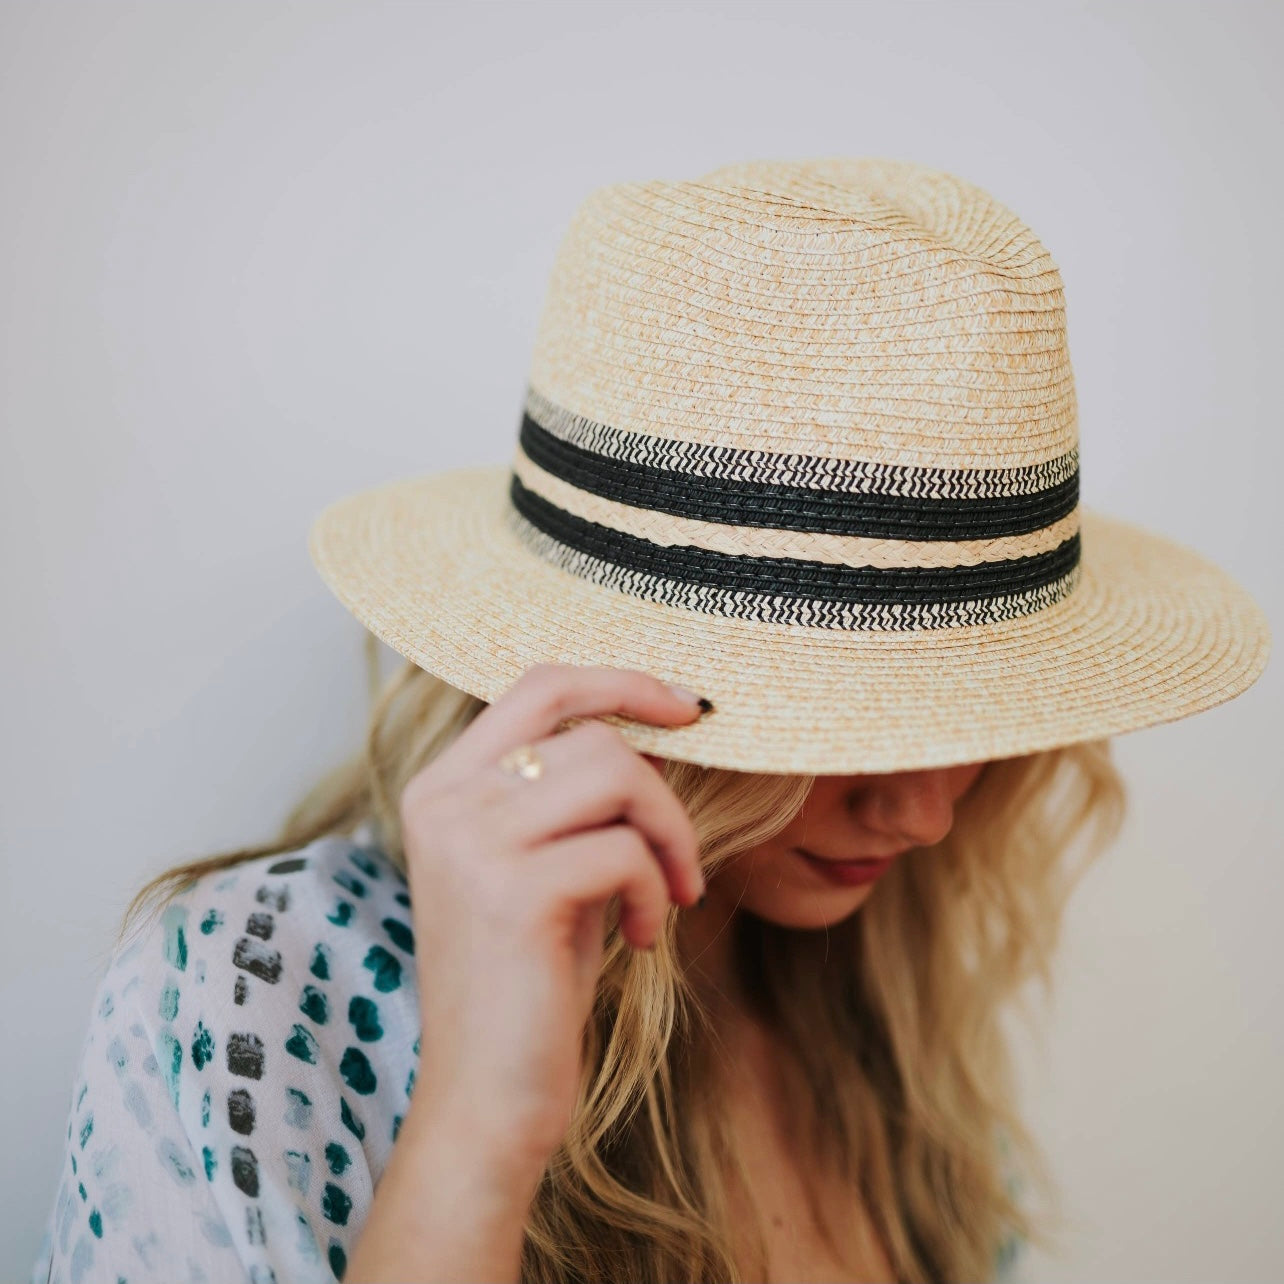 Charcoal Patterned Sun Hat